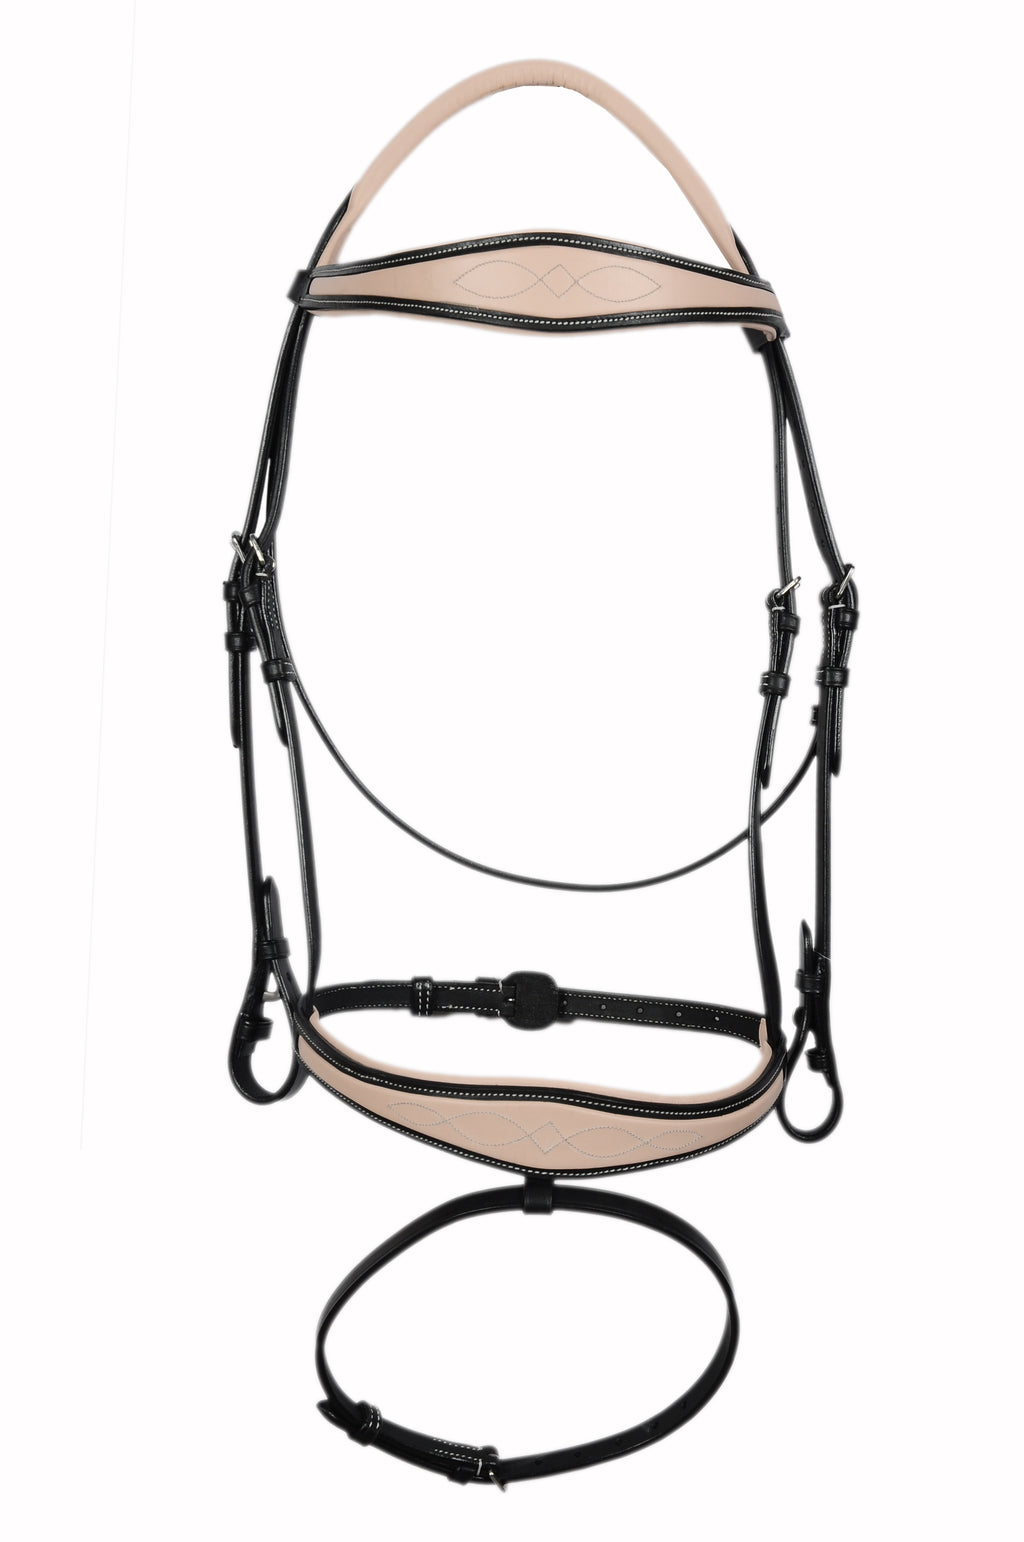 Padded Fancy Stitched Leather Jump Bridle